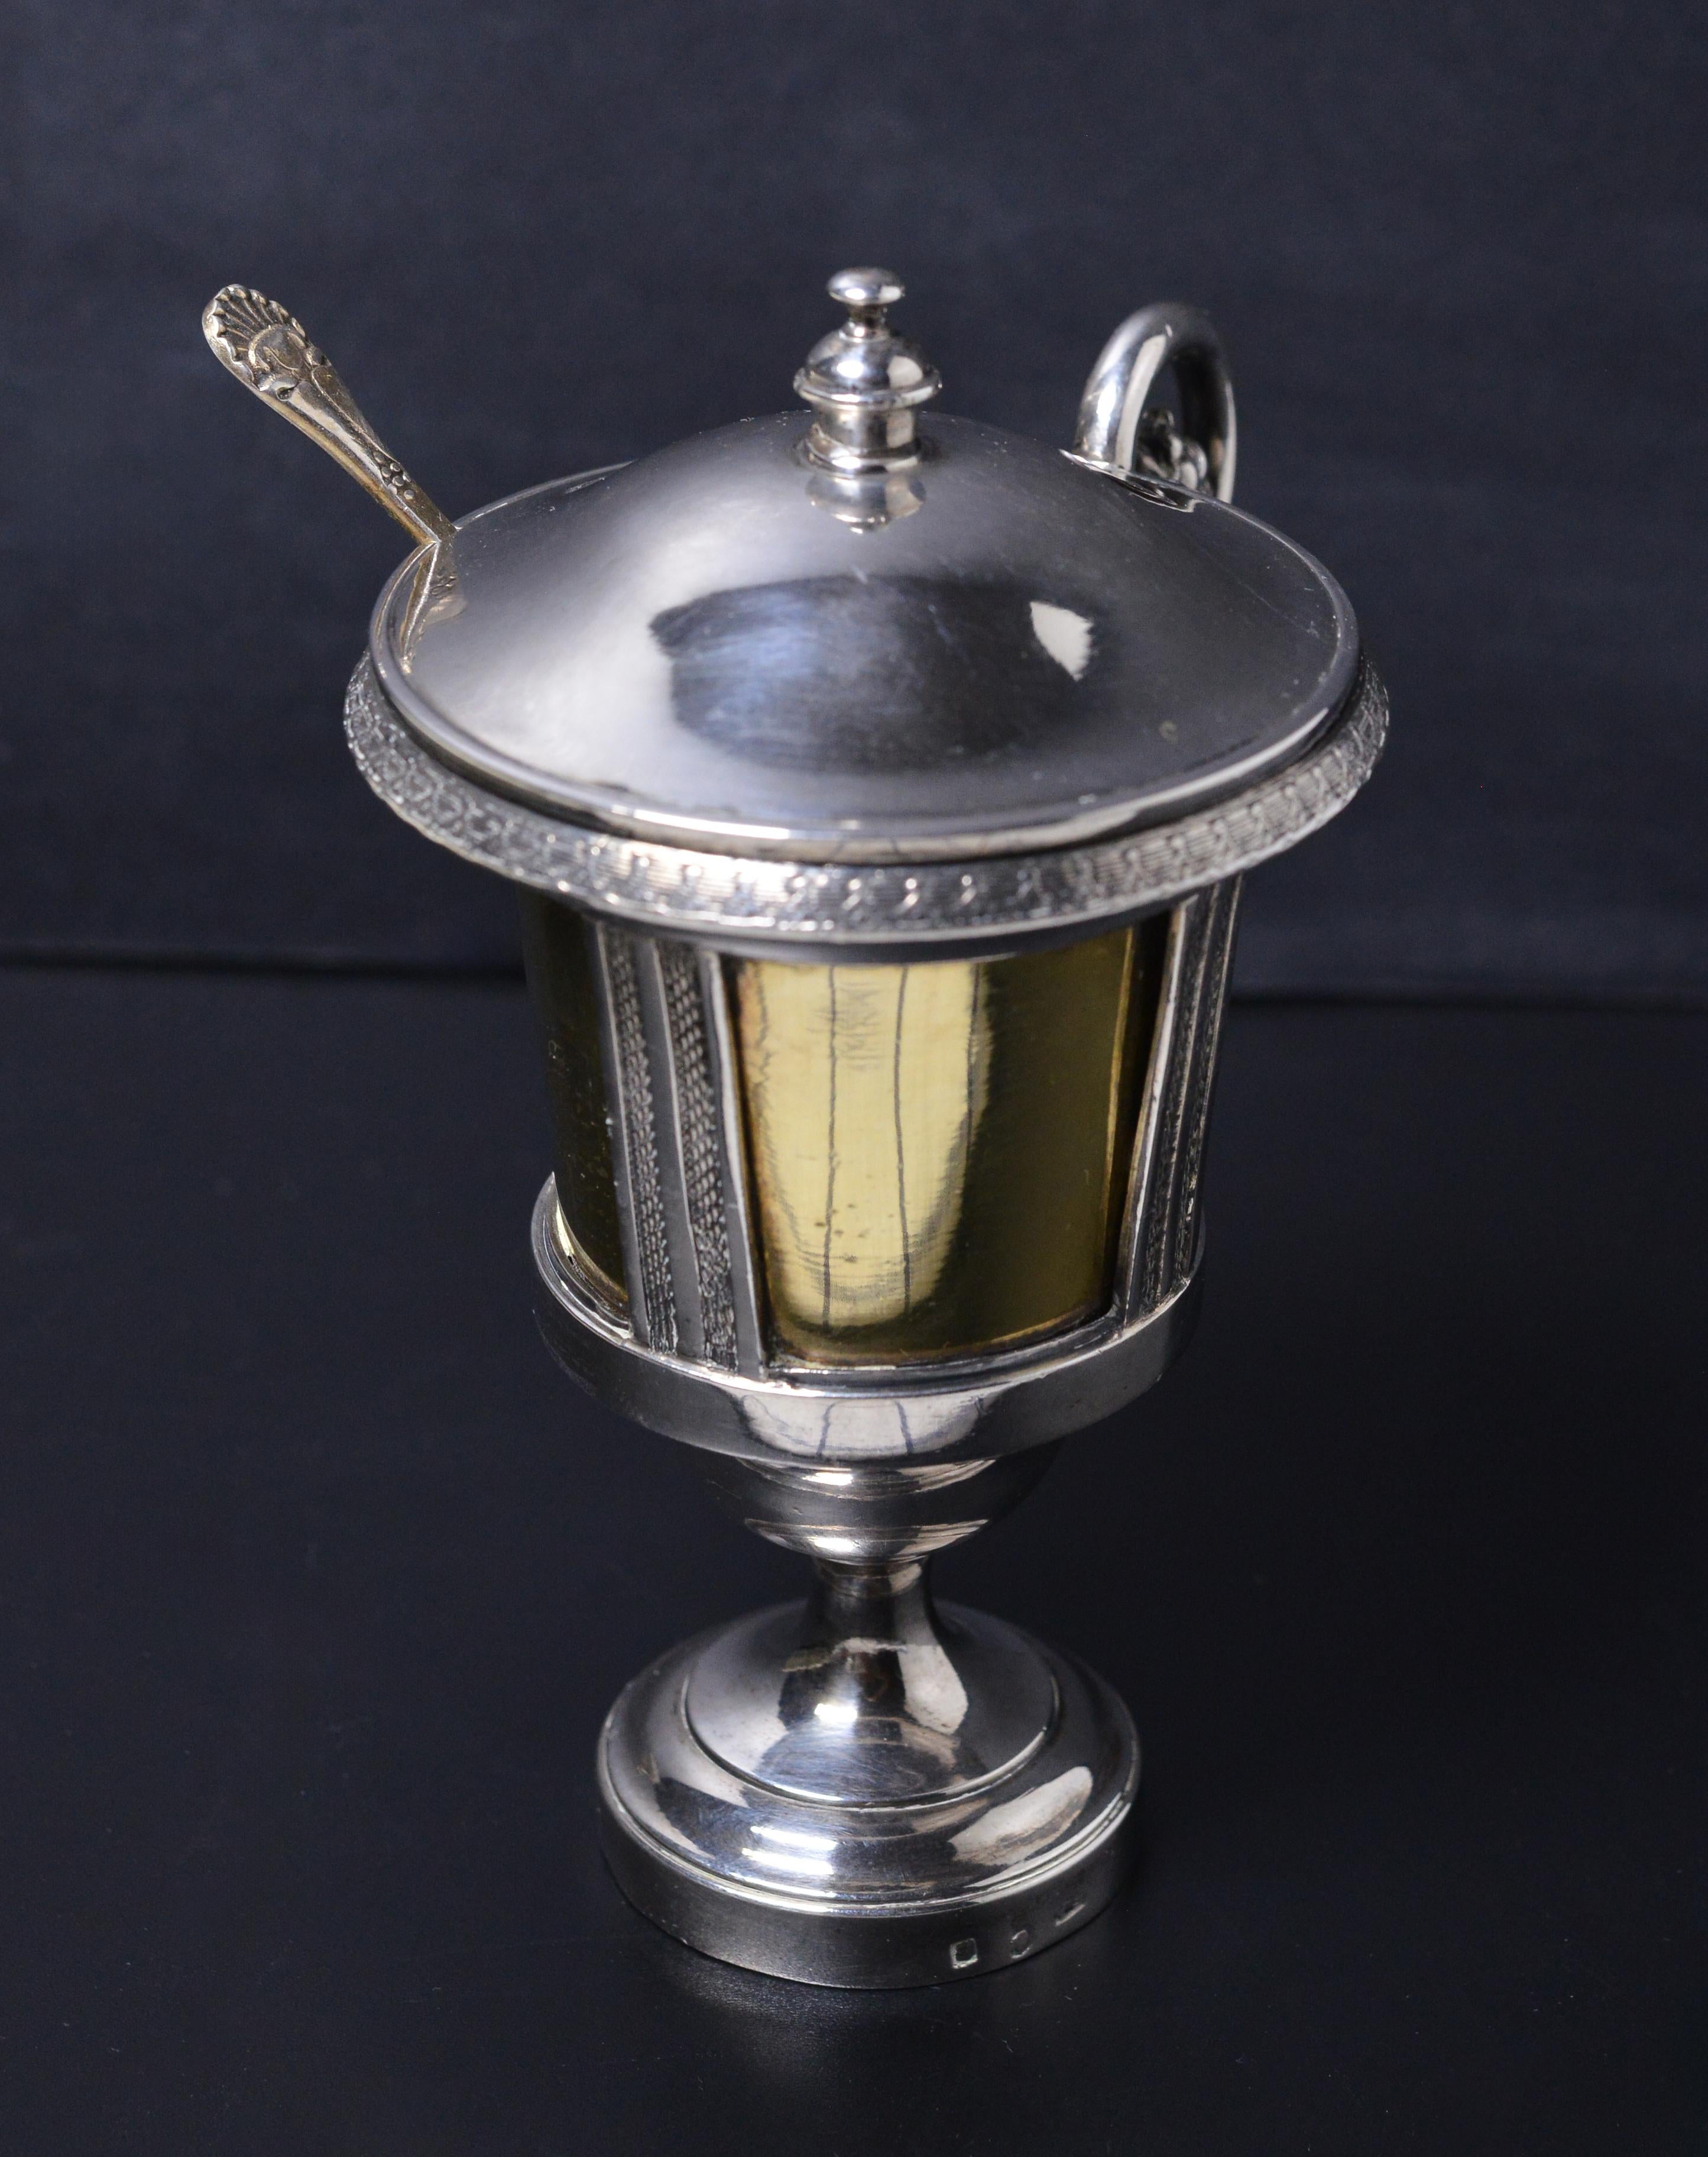 19th Century Swedish Gilt Heavy Silver Mustard or Sauce Cup Antique Empire Mug 1827 For Sale